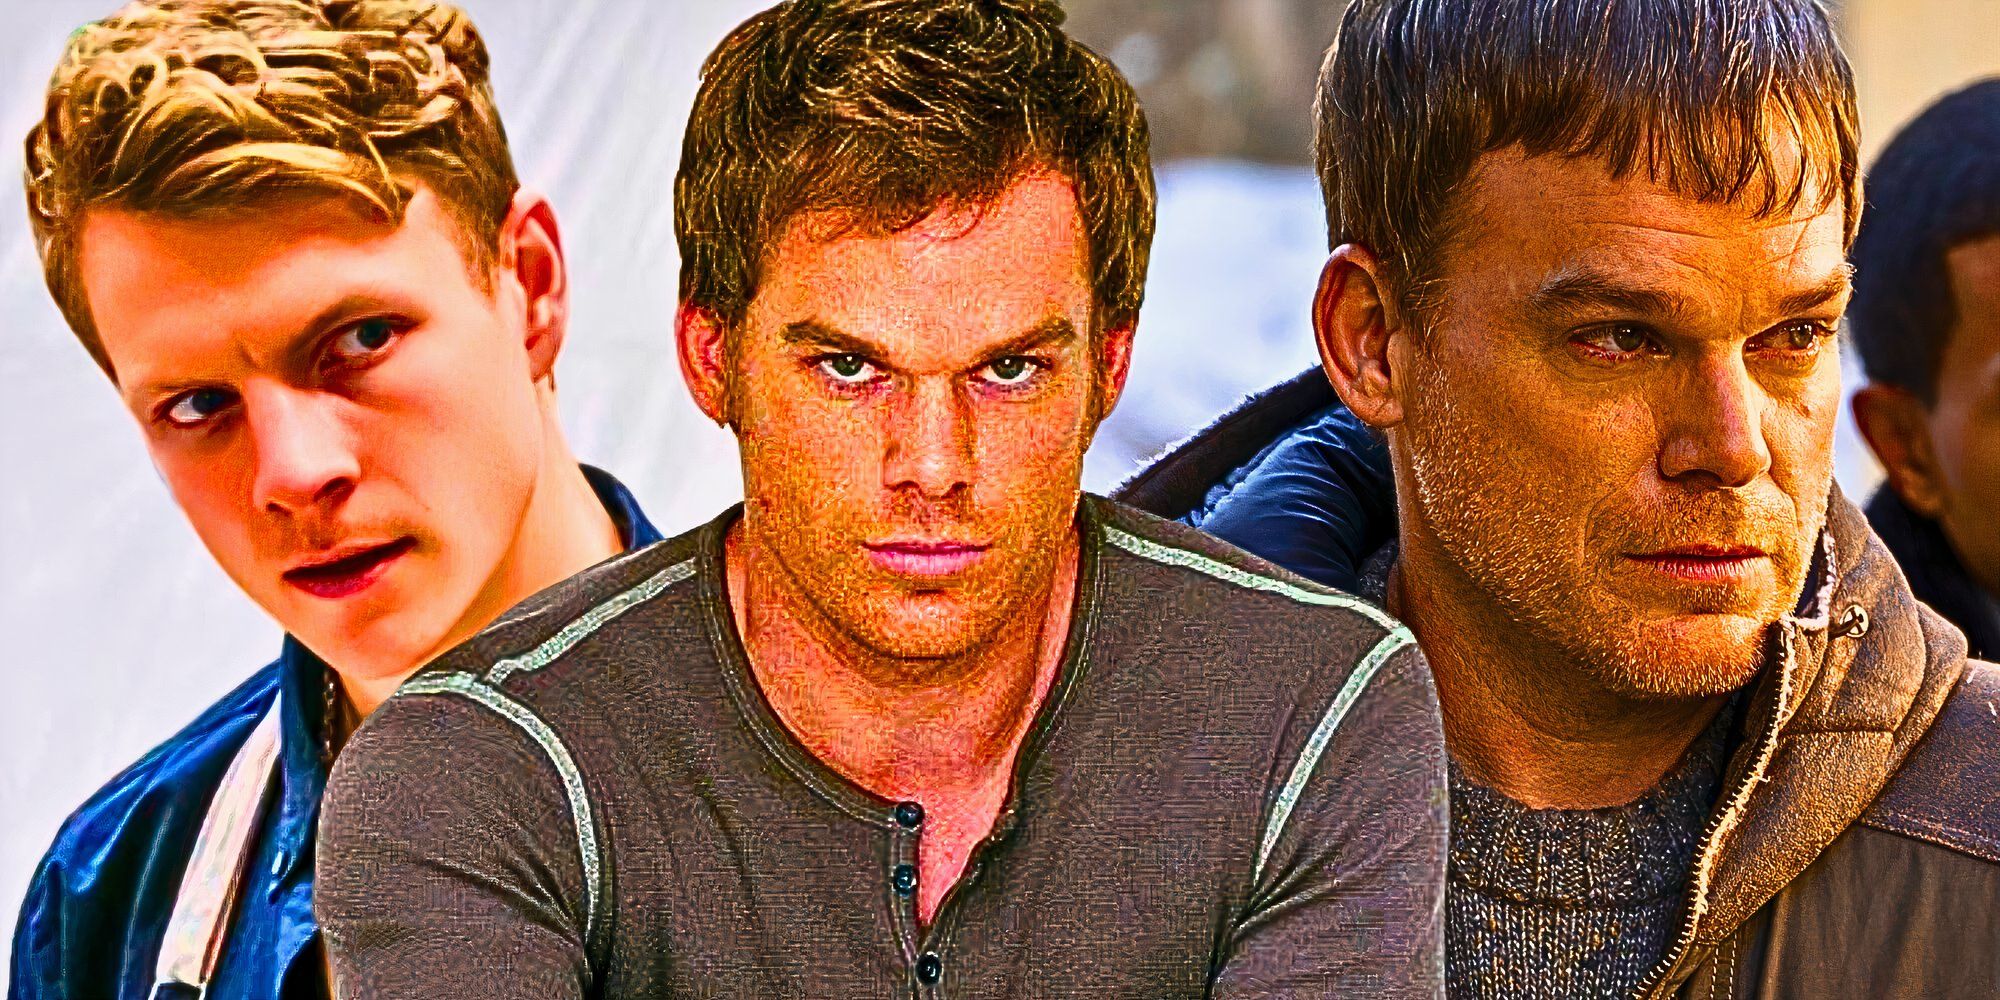 A custom image of Patrick Gibson and Michael C. Hall as Dexter Morgan from the Dexter franchise